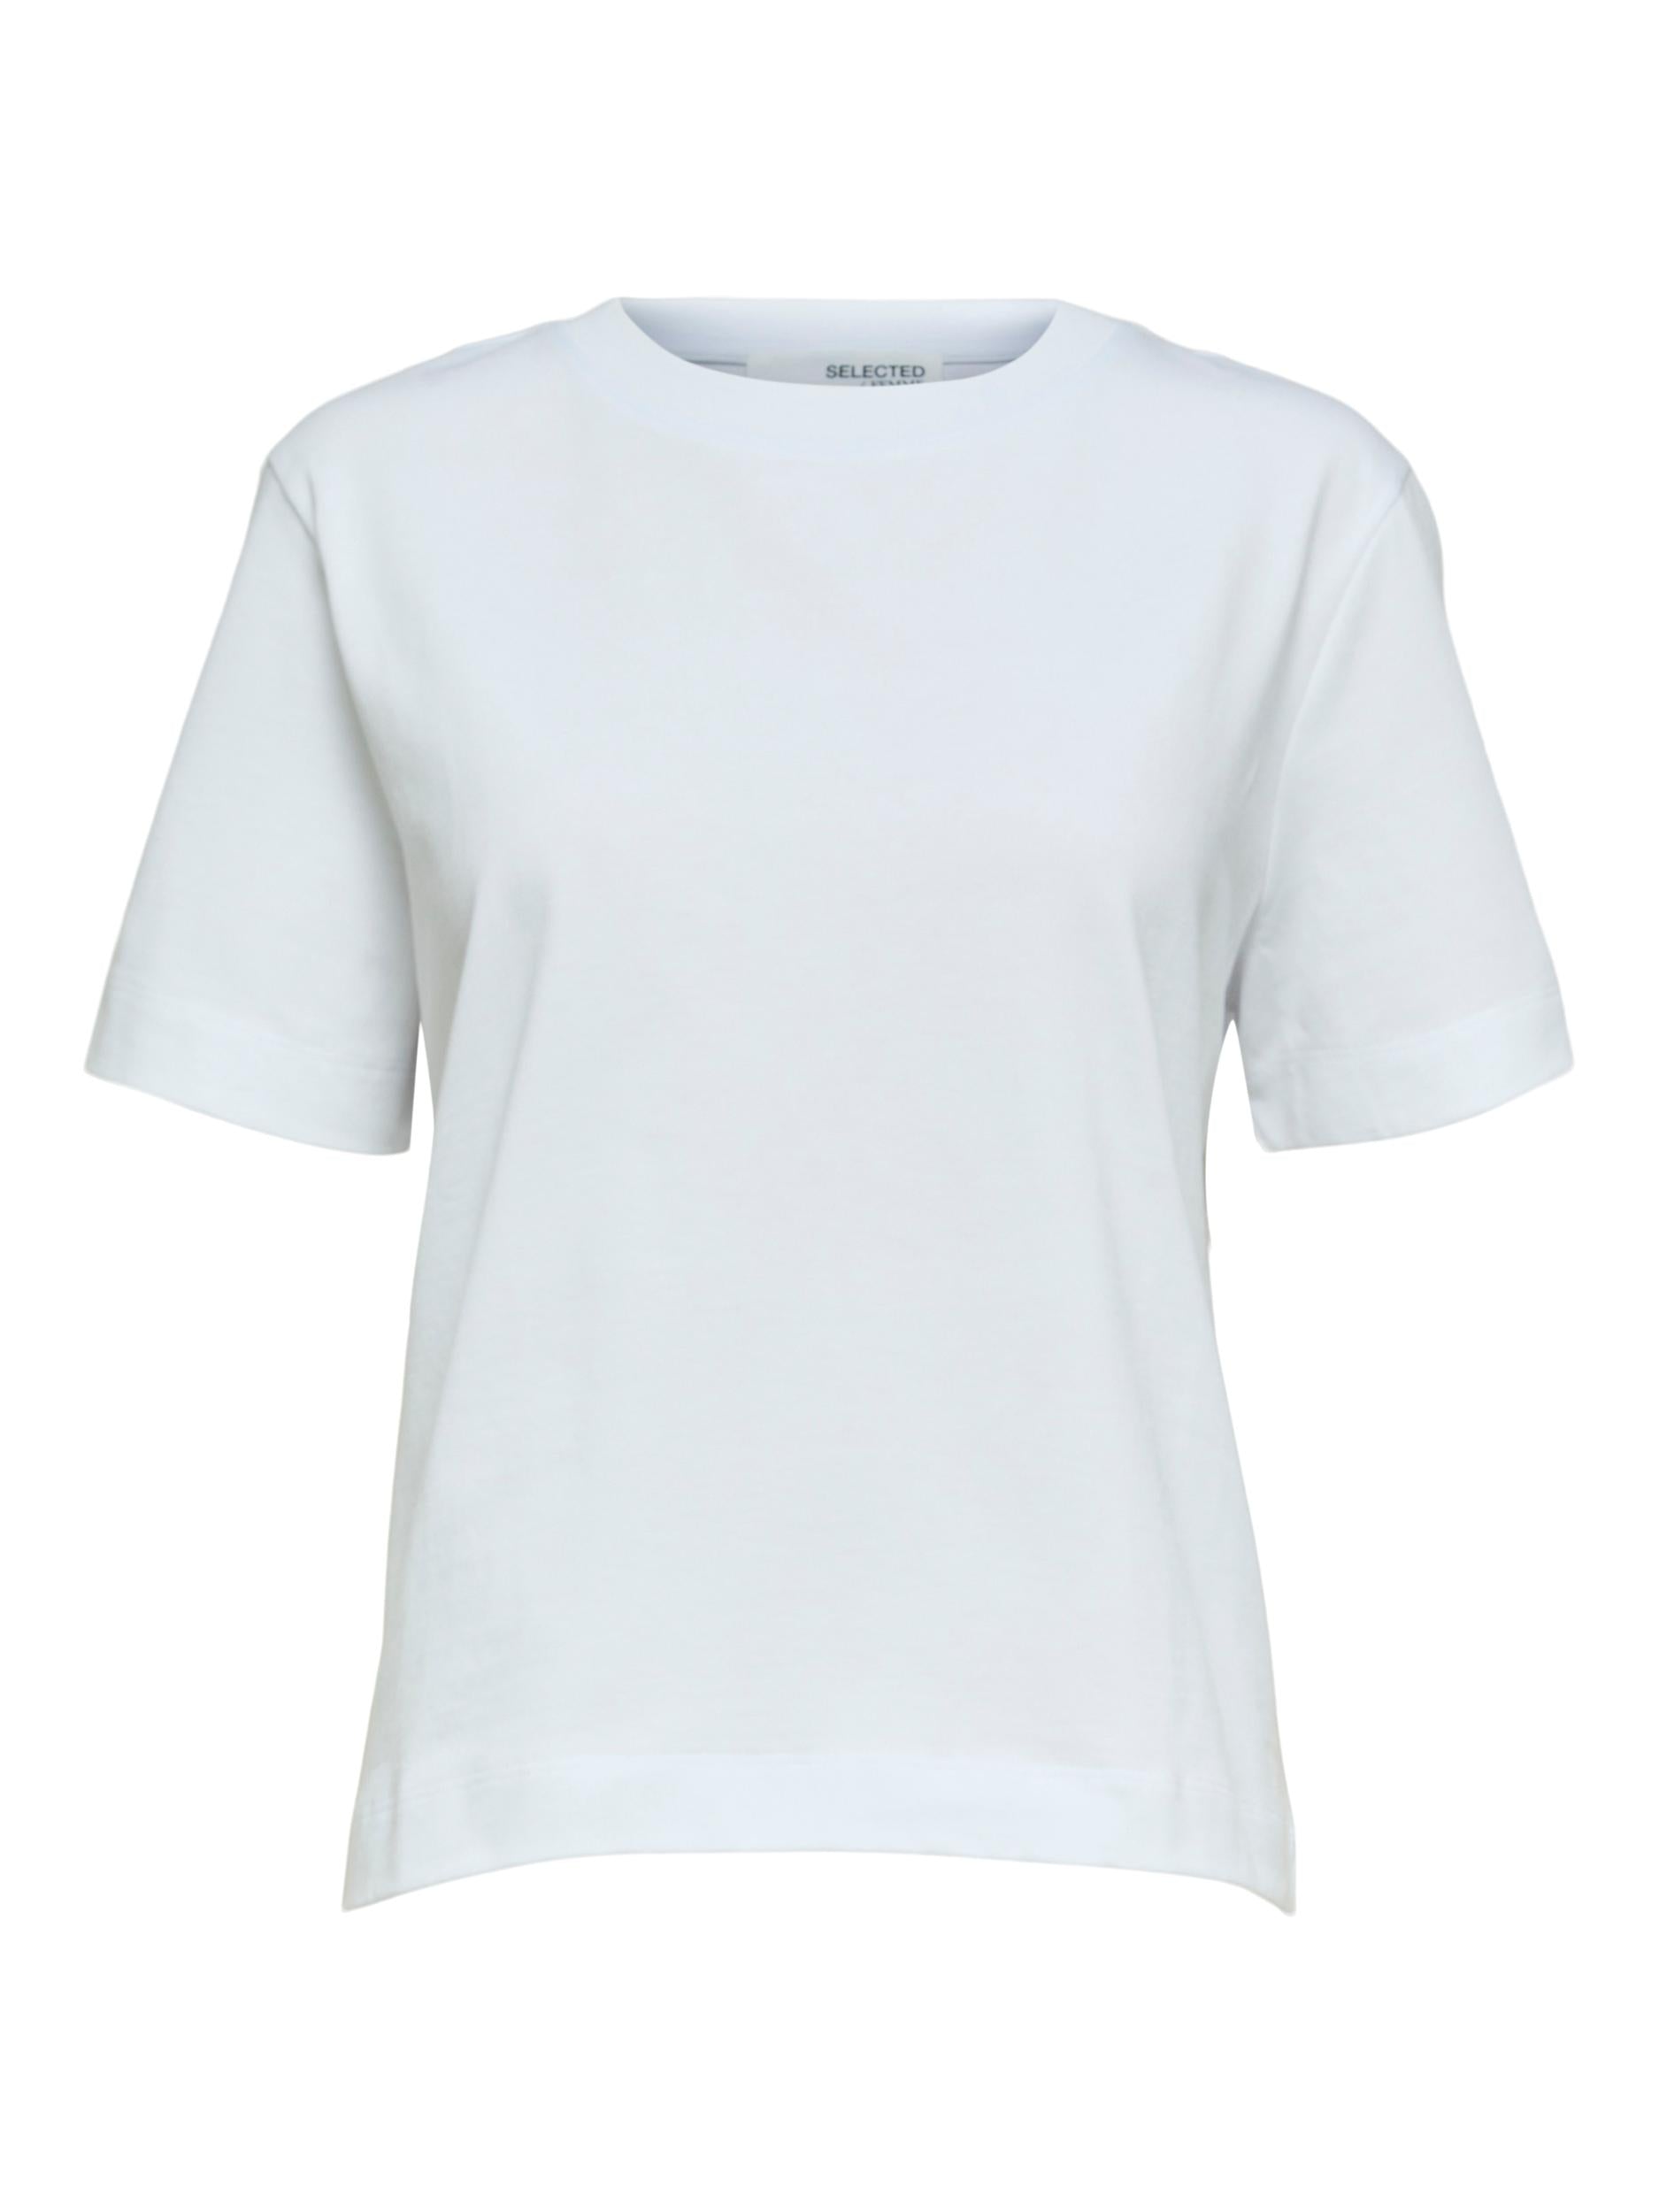 Selected Femme "Essential" Boxy Tee white